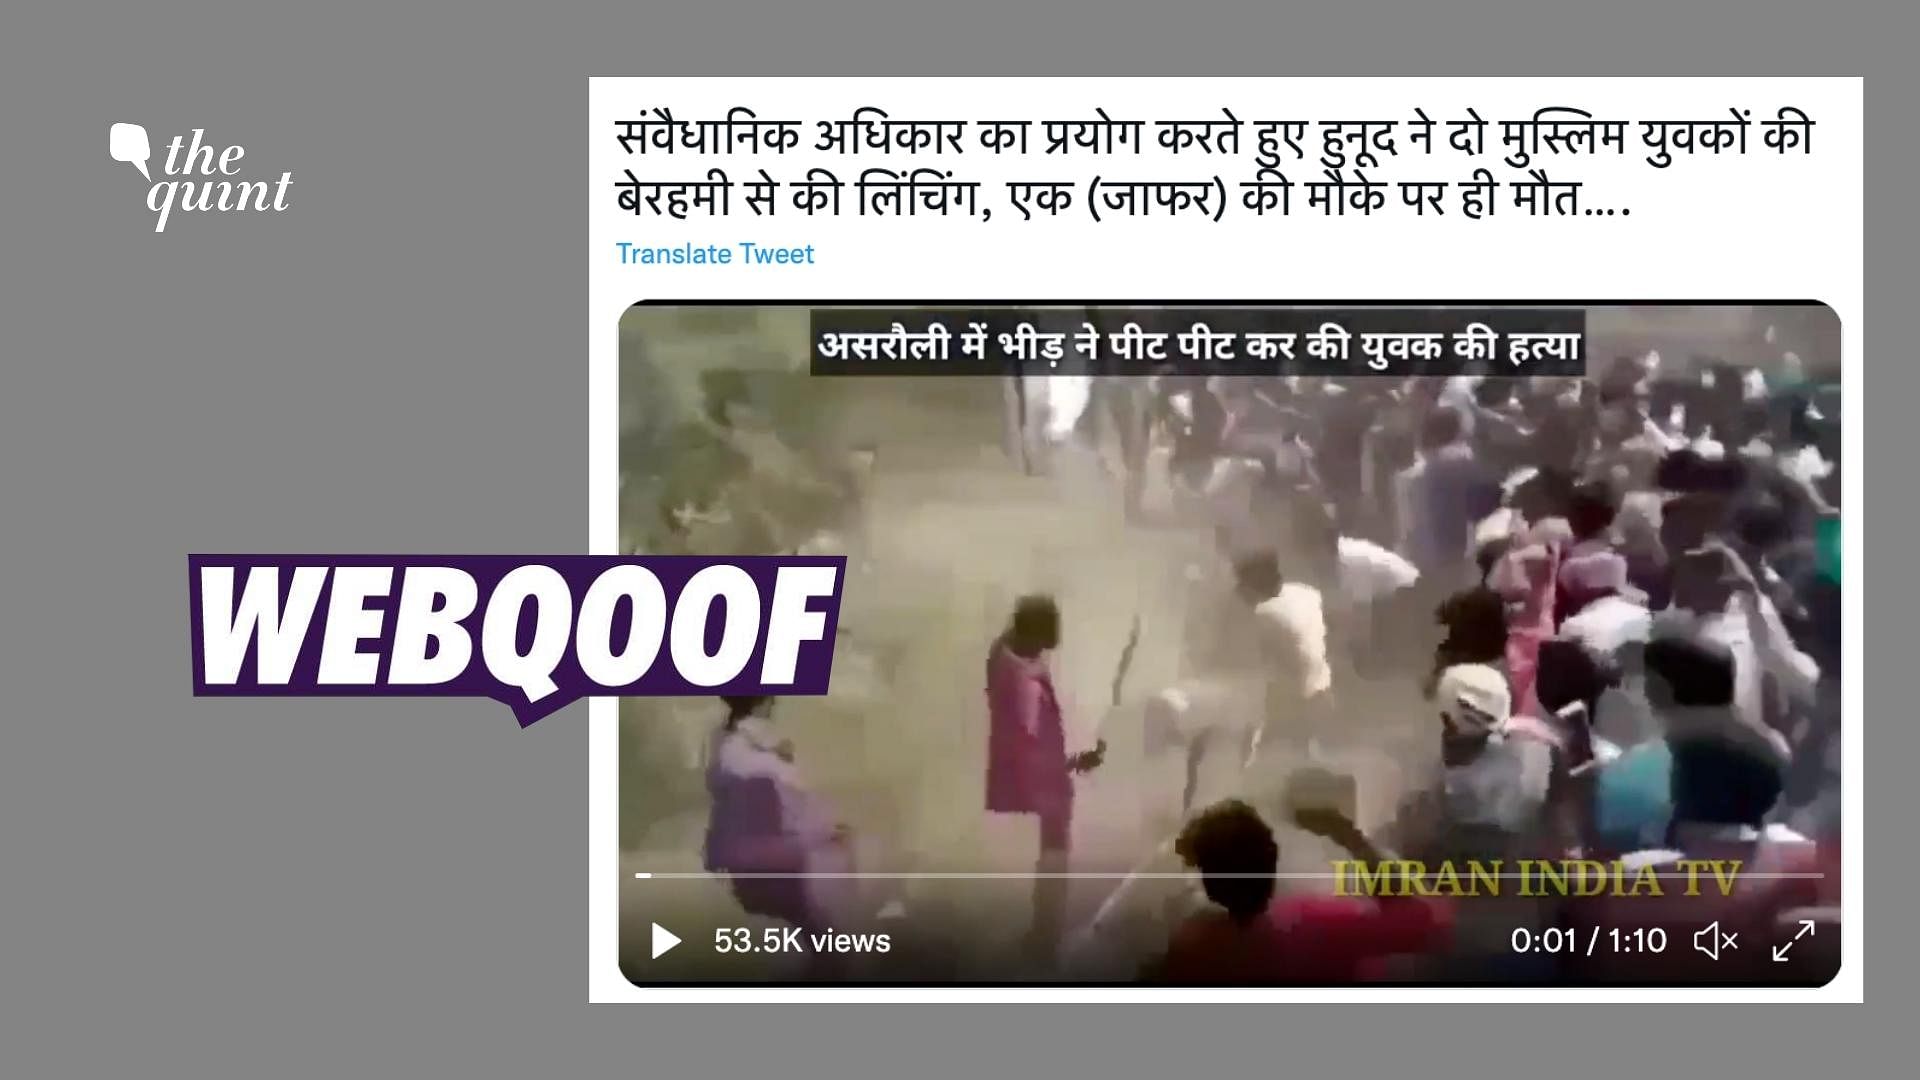 <div class="paragraphs"><p>The claim states that the incident of mob lynching took place in Asrauli, Uttar Pradesh.</p></div>